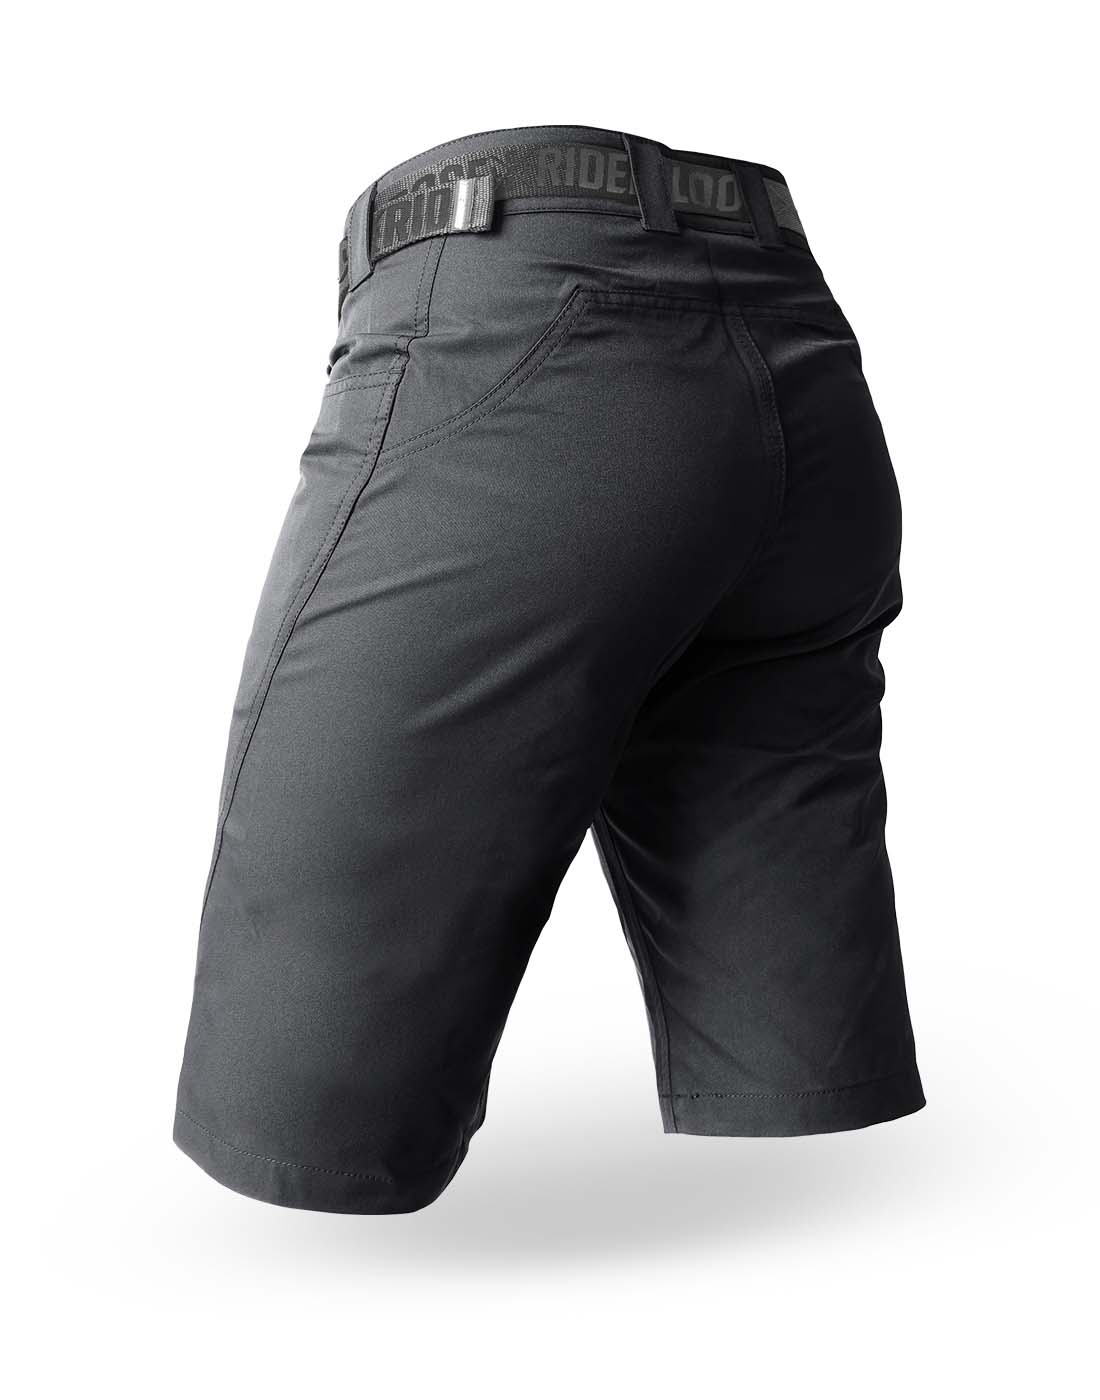 Shorts Sessions Black Loose Riders